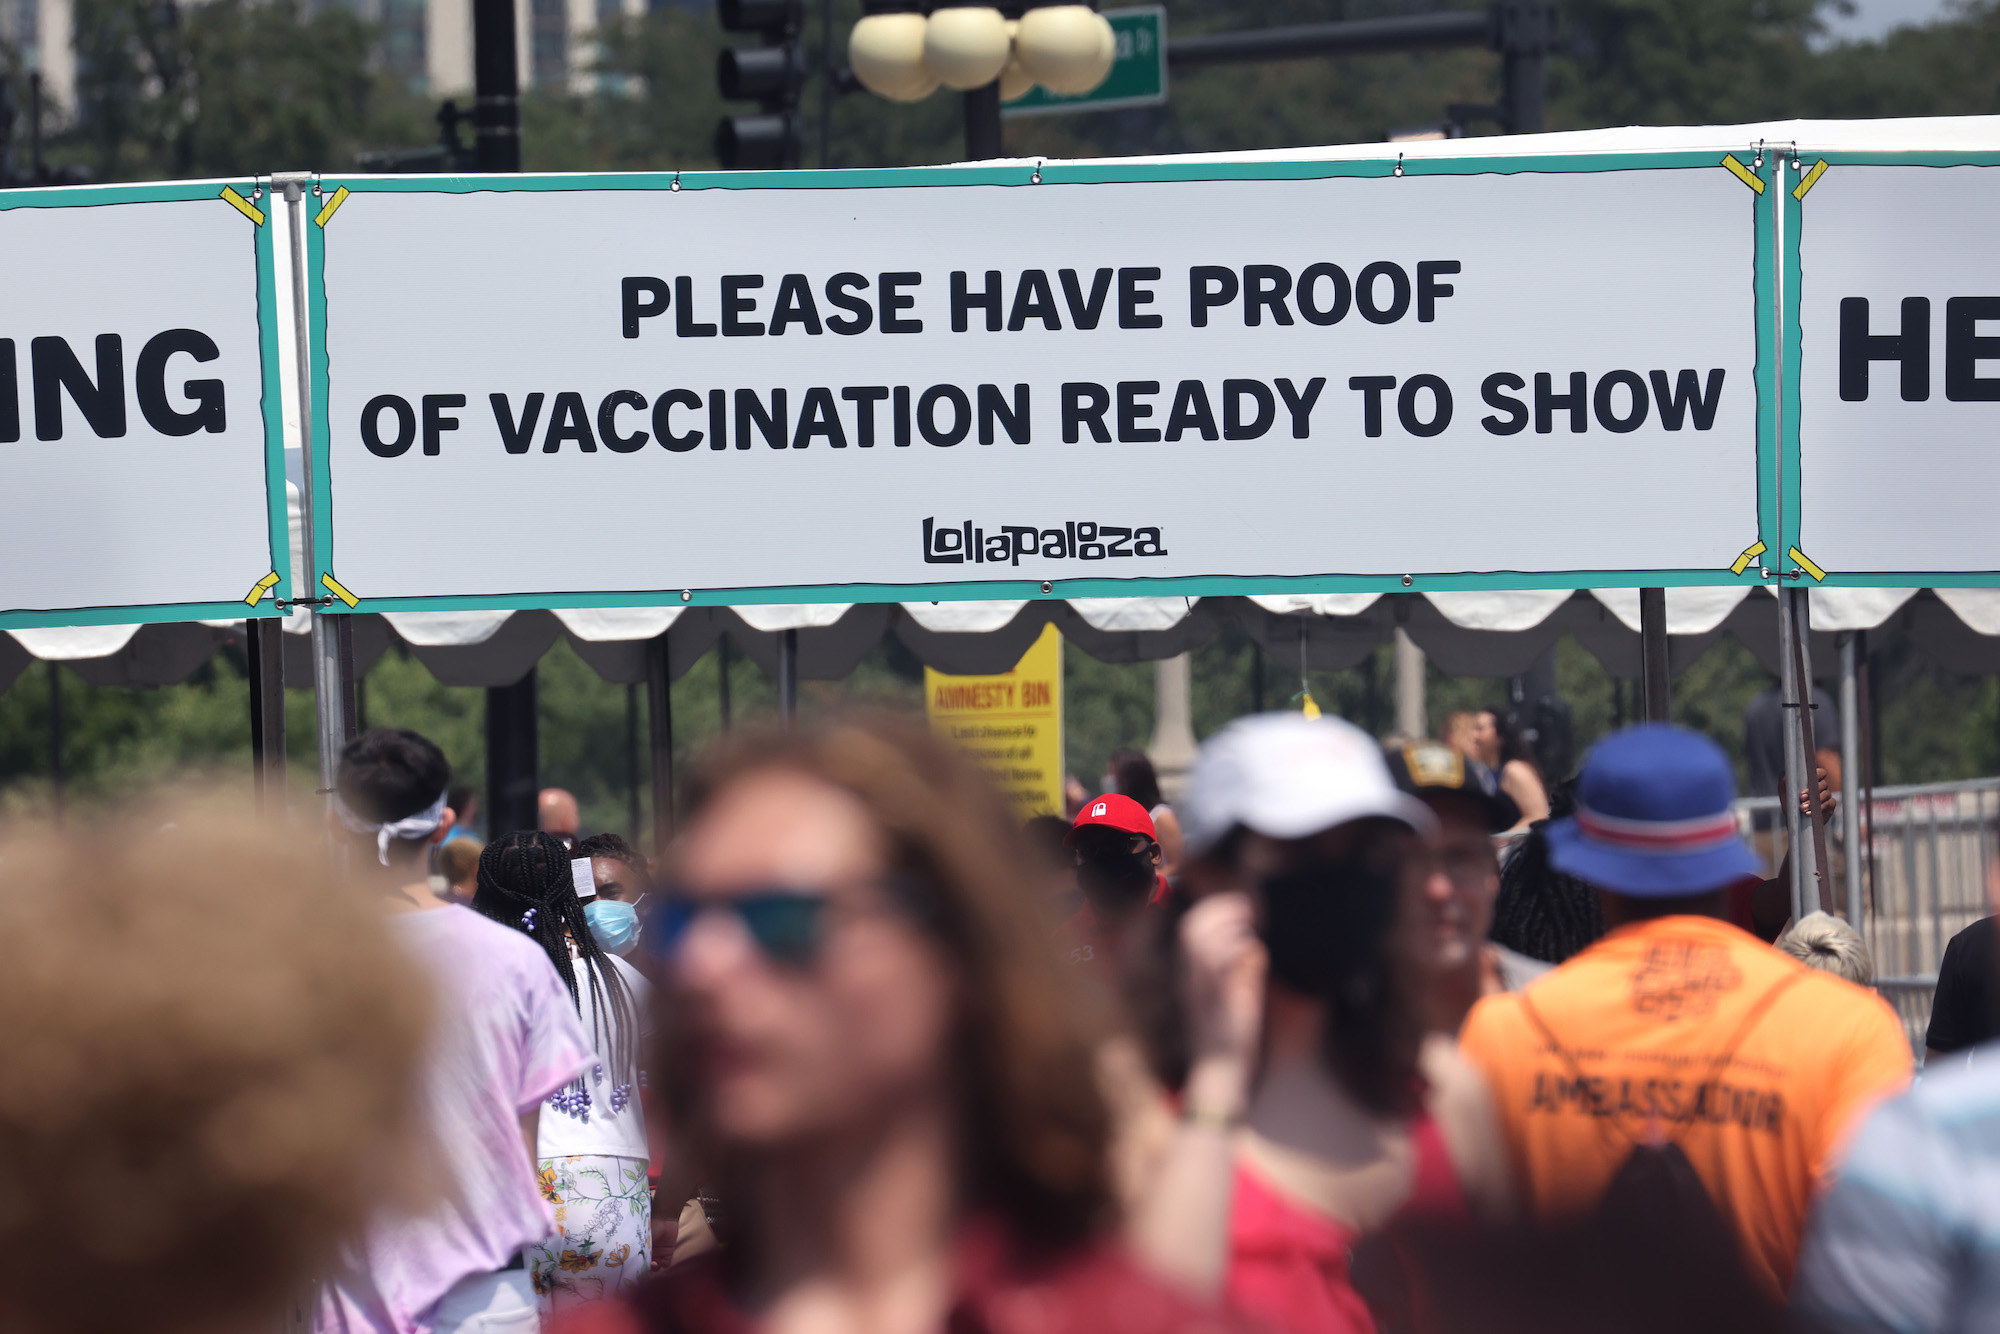 Signage outside of Lollapalooza asks attendees to have proof of vaccination ready to present at gate.